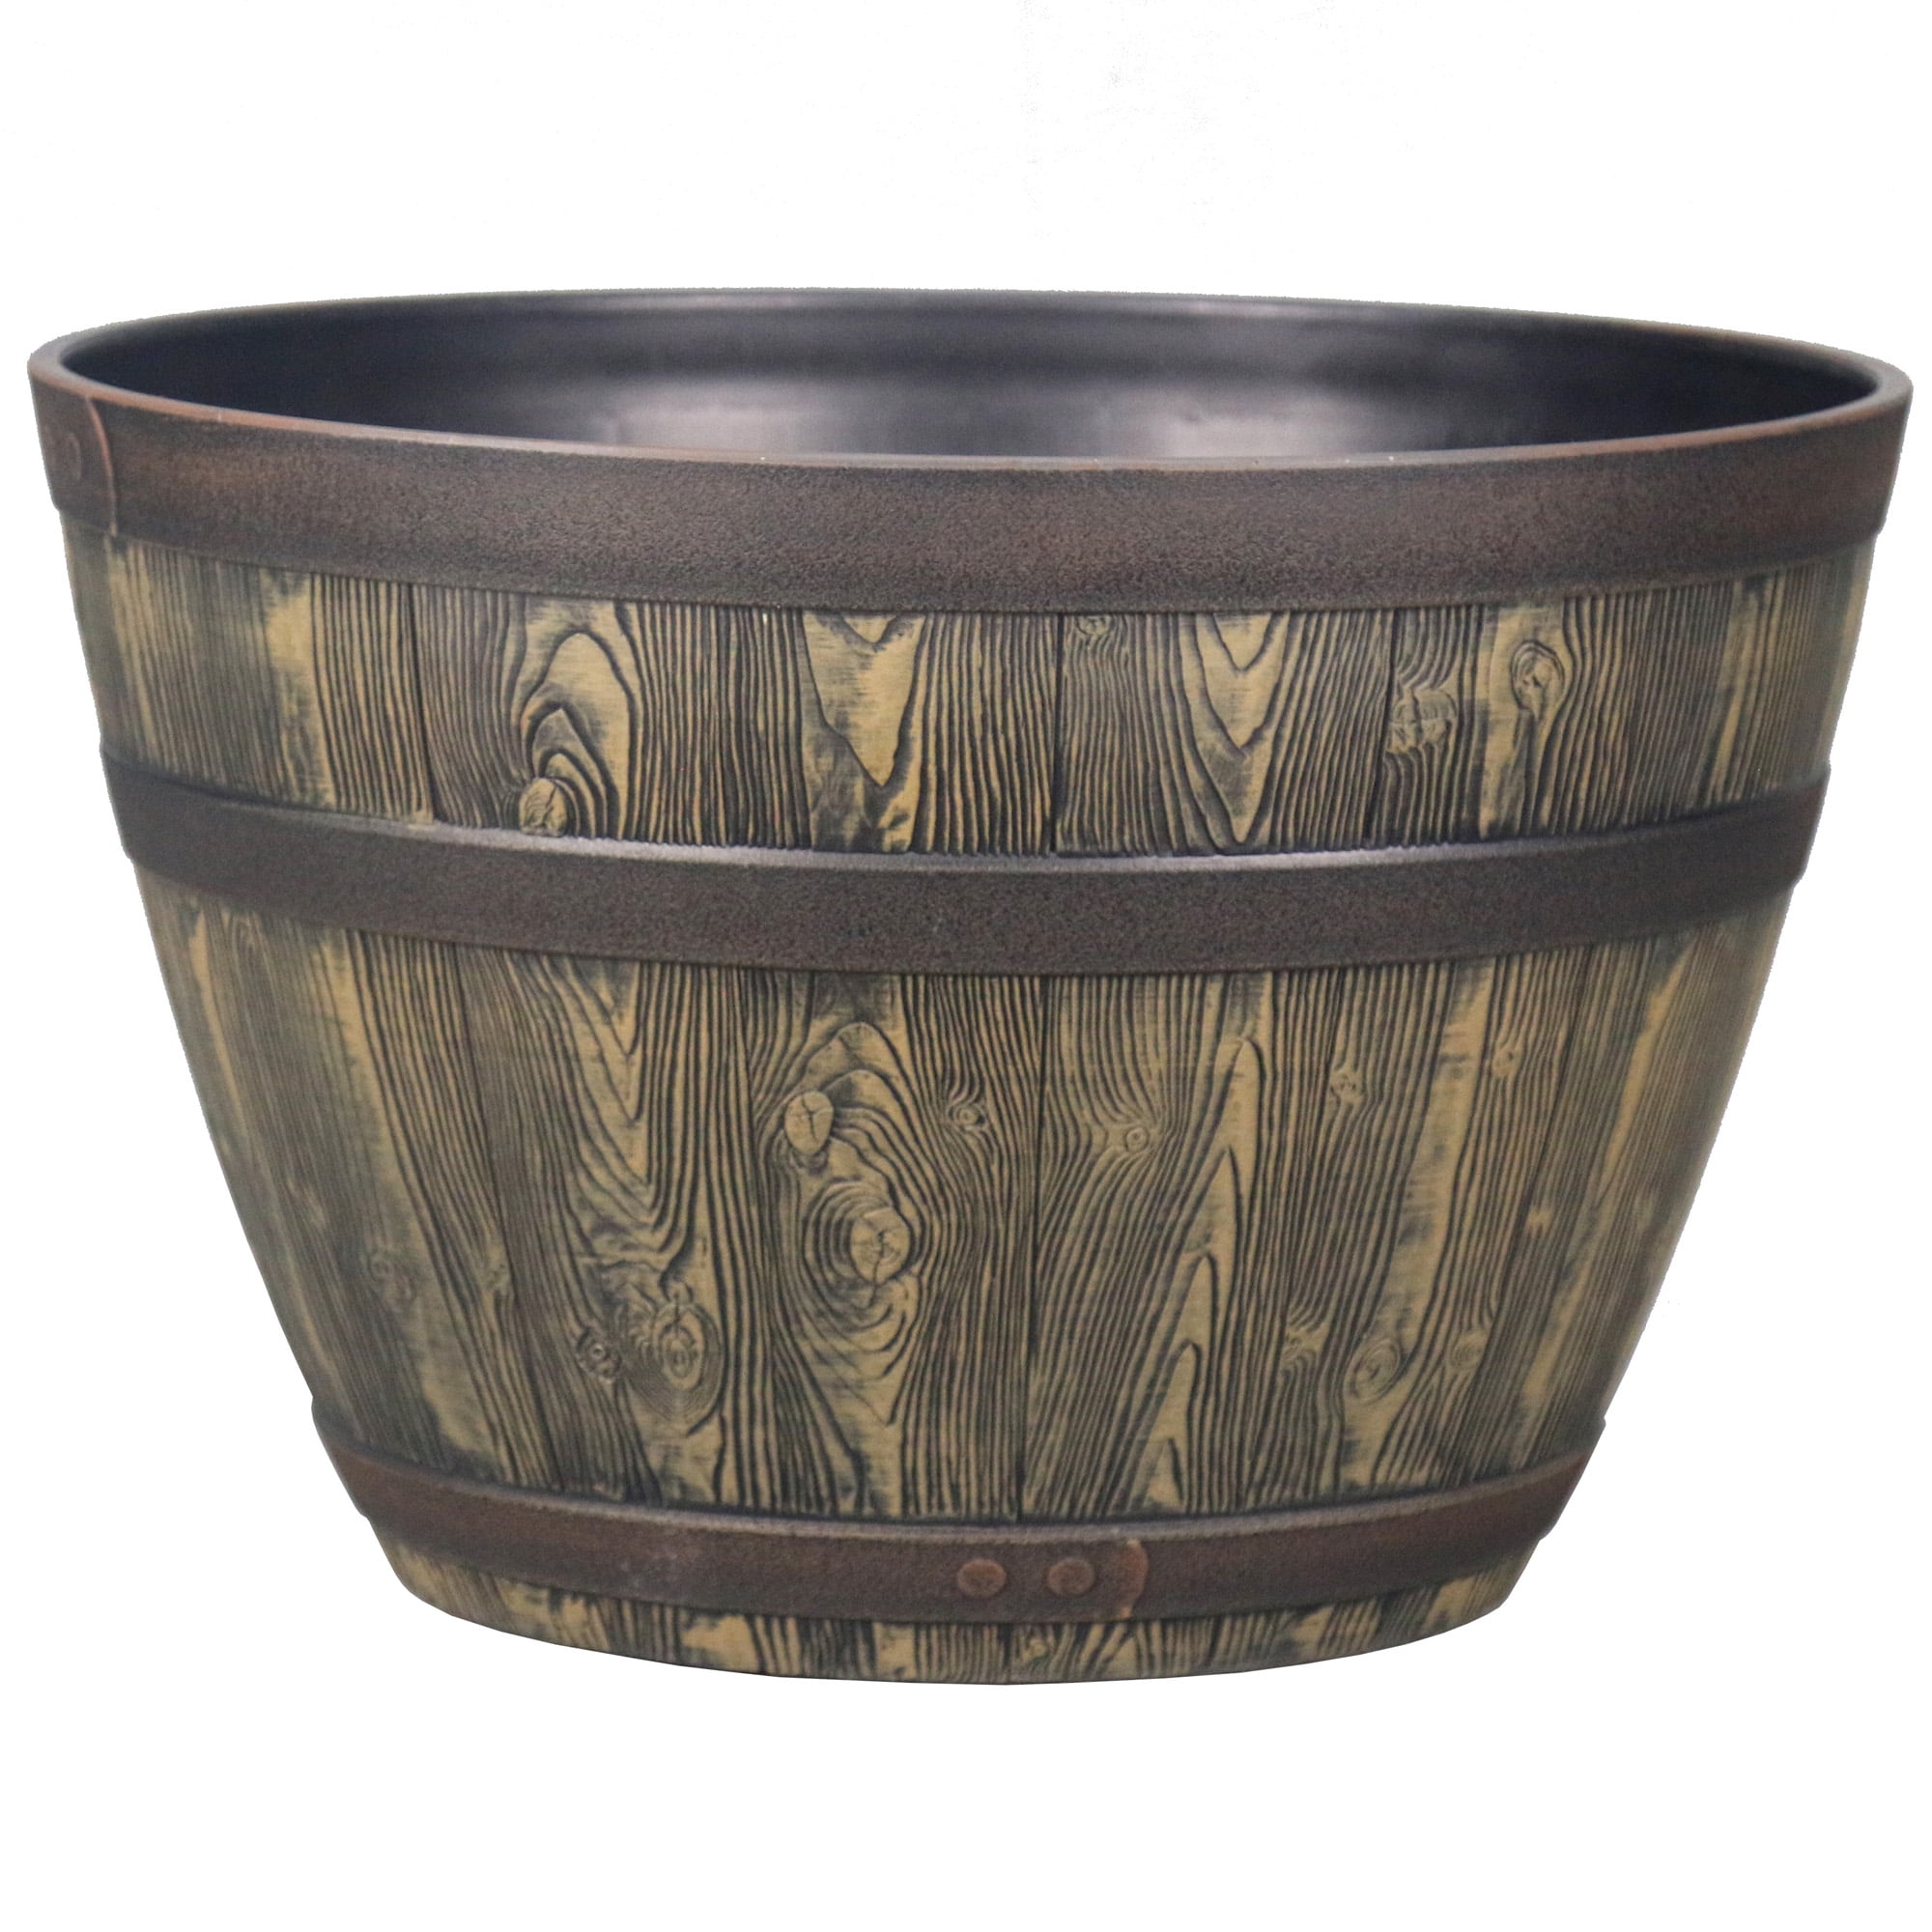 Better Homes & Gardens 20" x 20" x 13" Round Brown Resin Whiskey Barrel Plant Planter with Weather Resistant Material